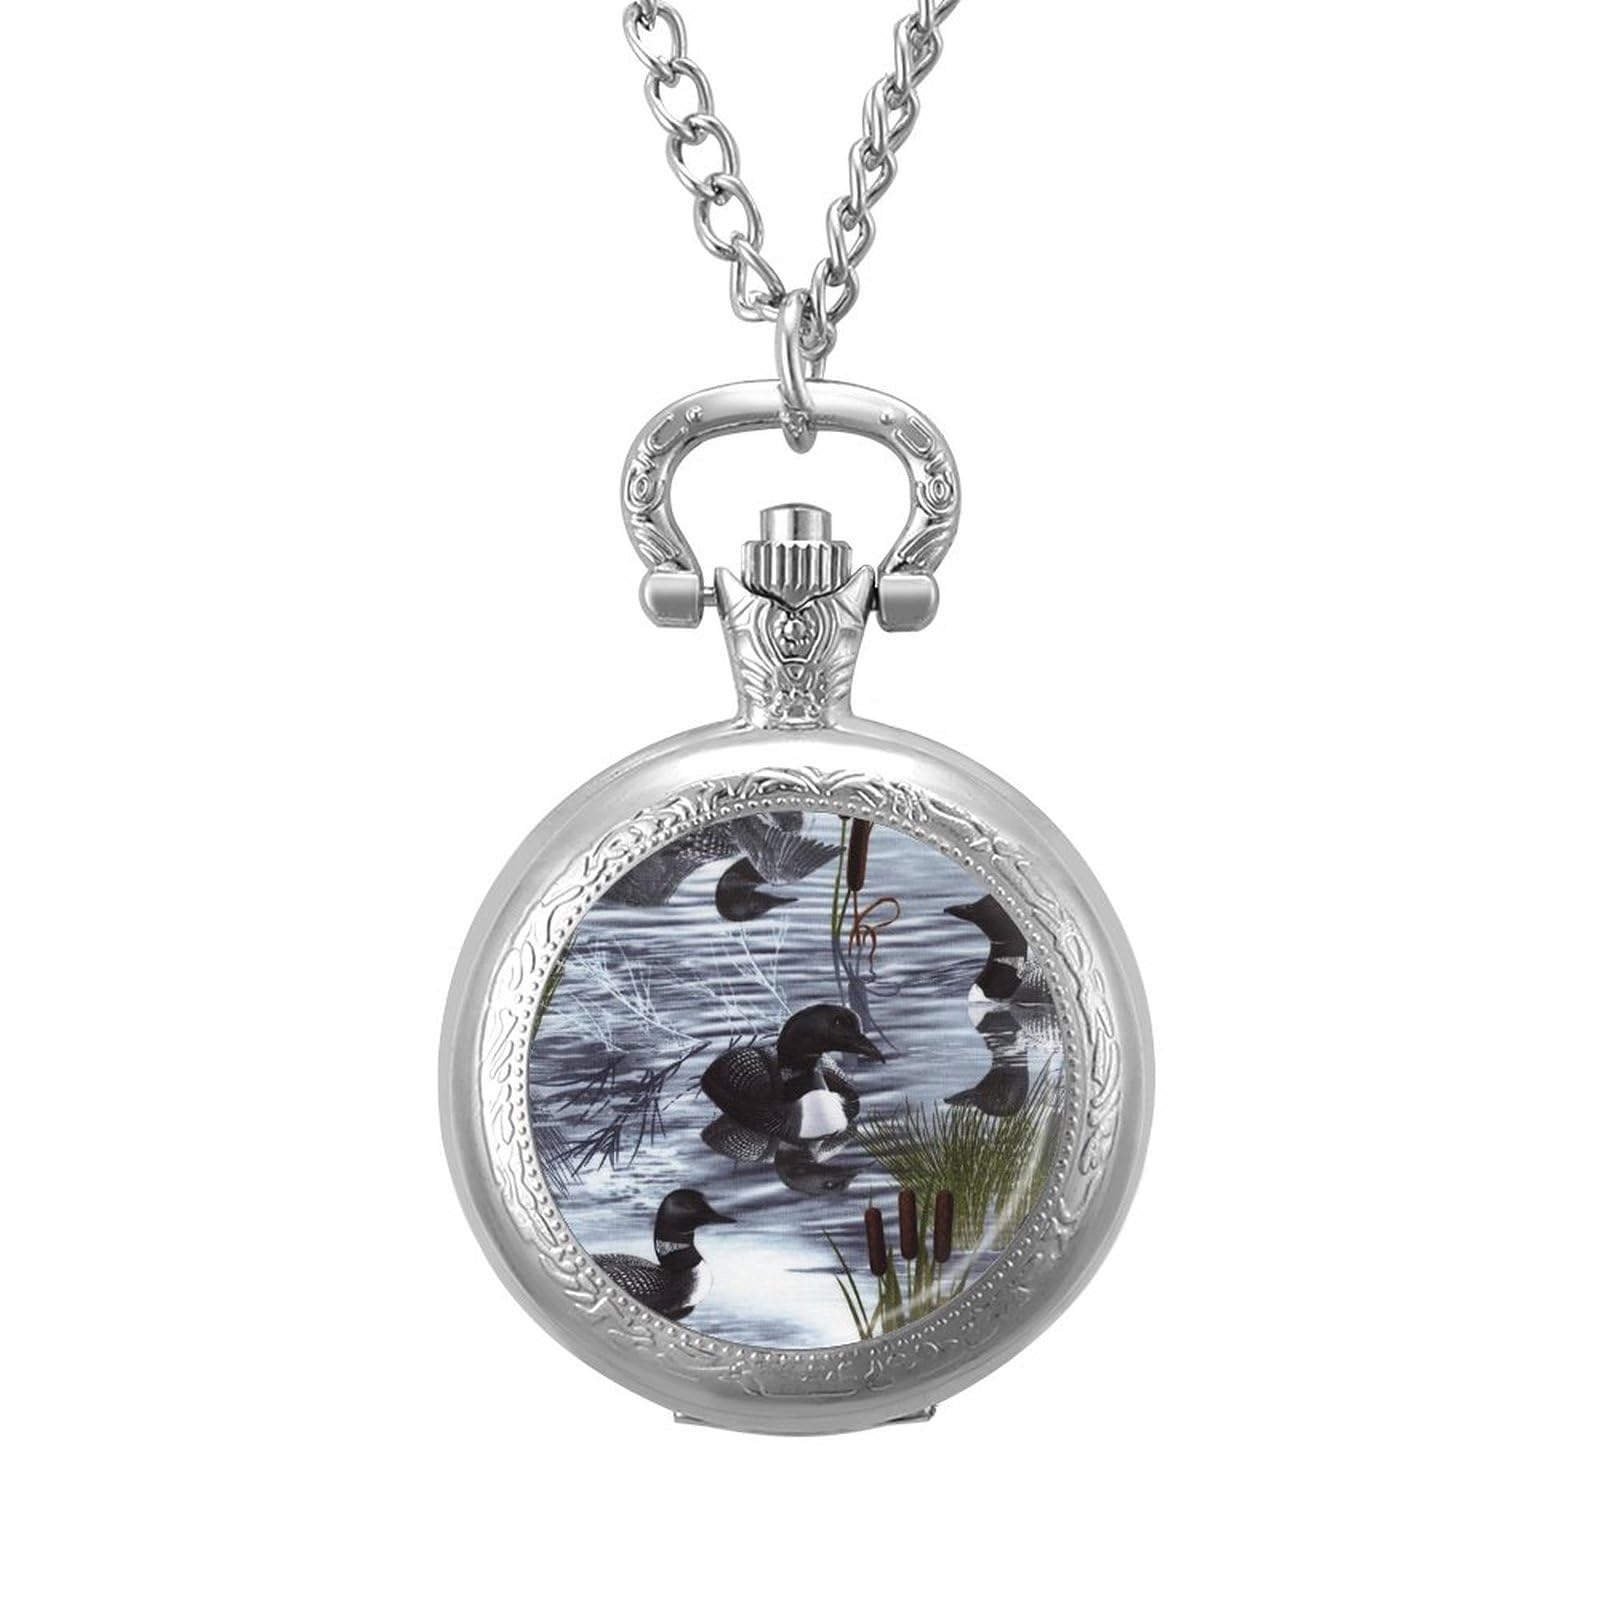 Loons Duck Vintage Pocket Watches with Chain for Men Fathers Day Xmas Present Daily Use